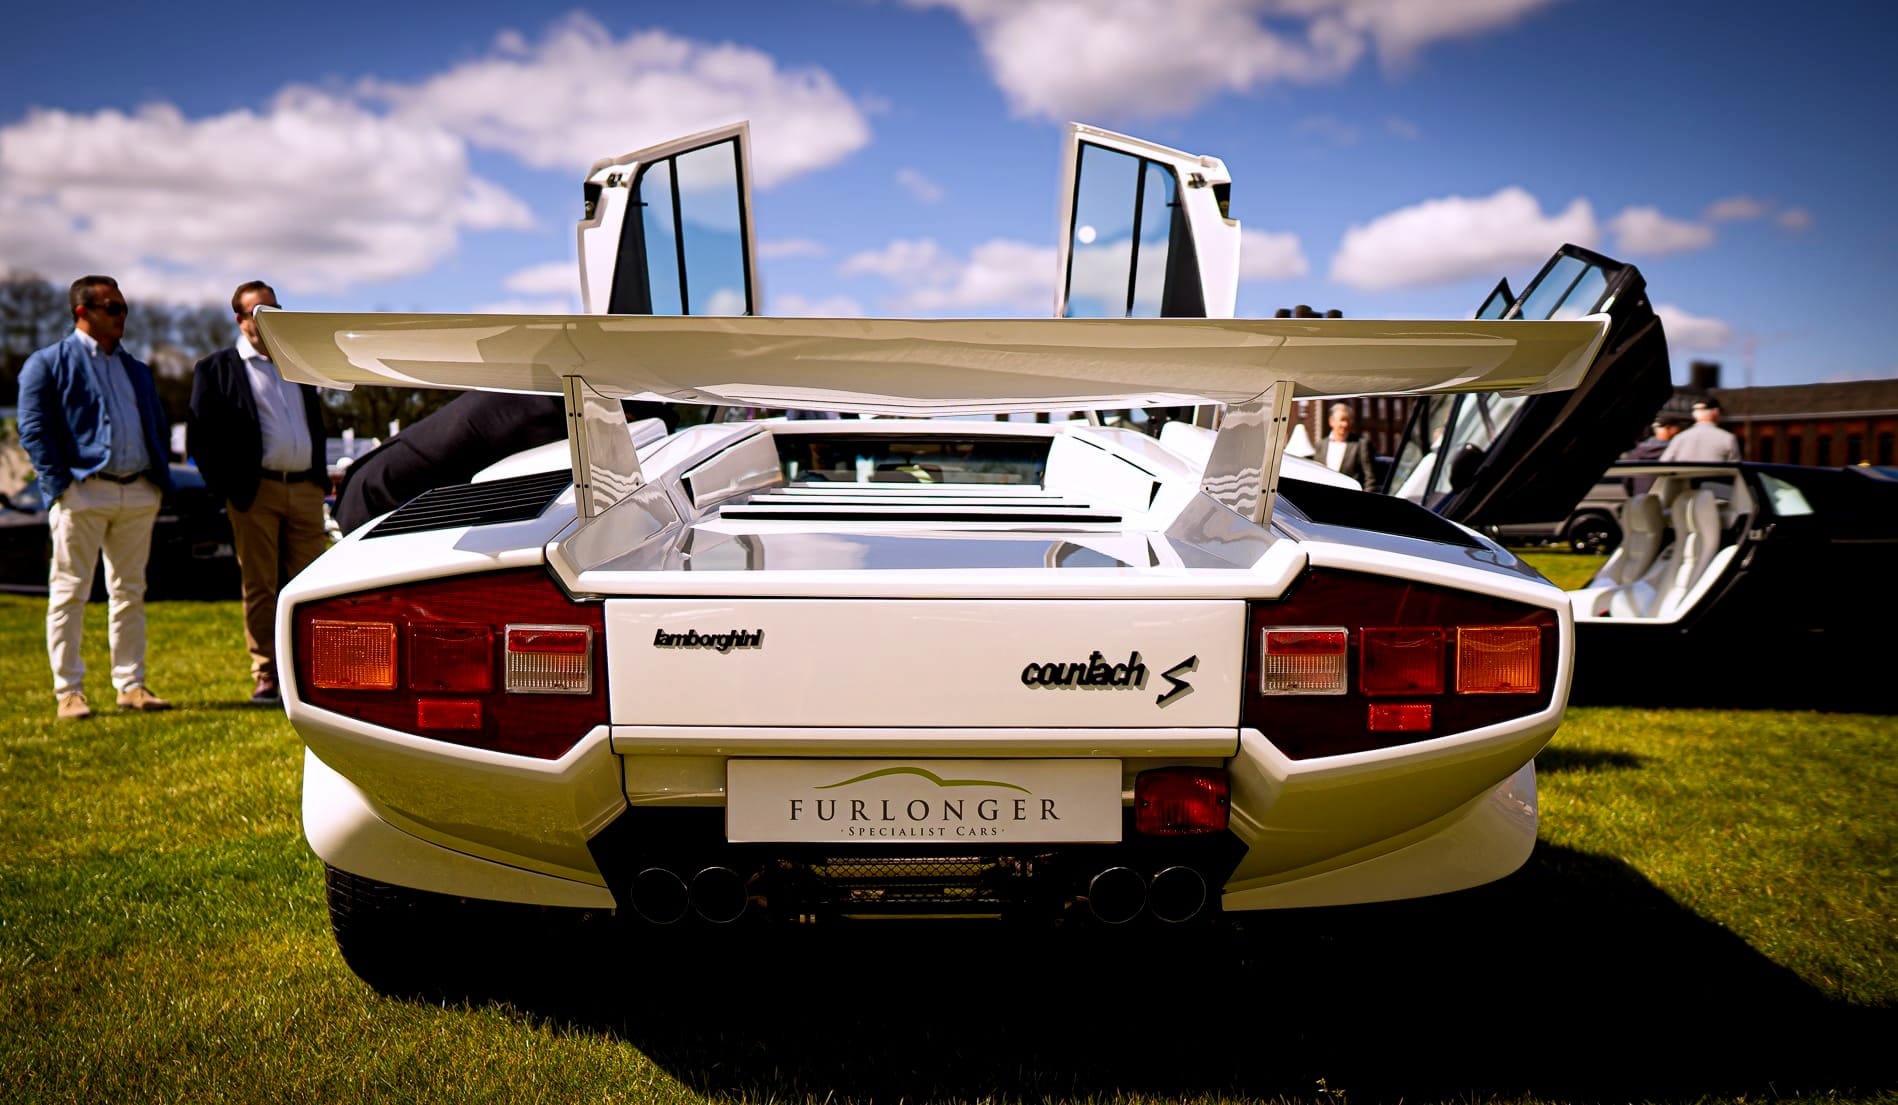 "The Ultimate Luxury Car Showcase: Highlights from the Third Salon Privé London Event"